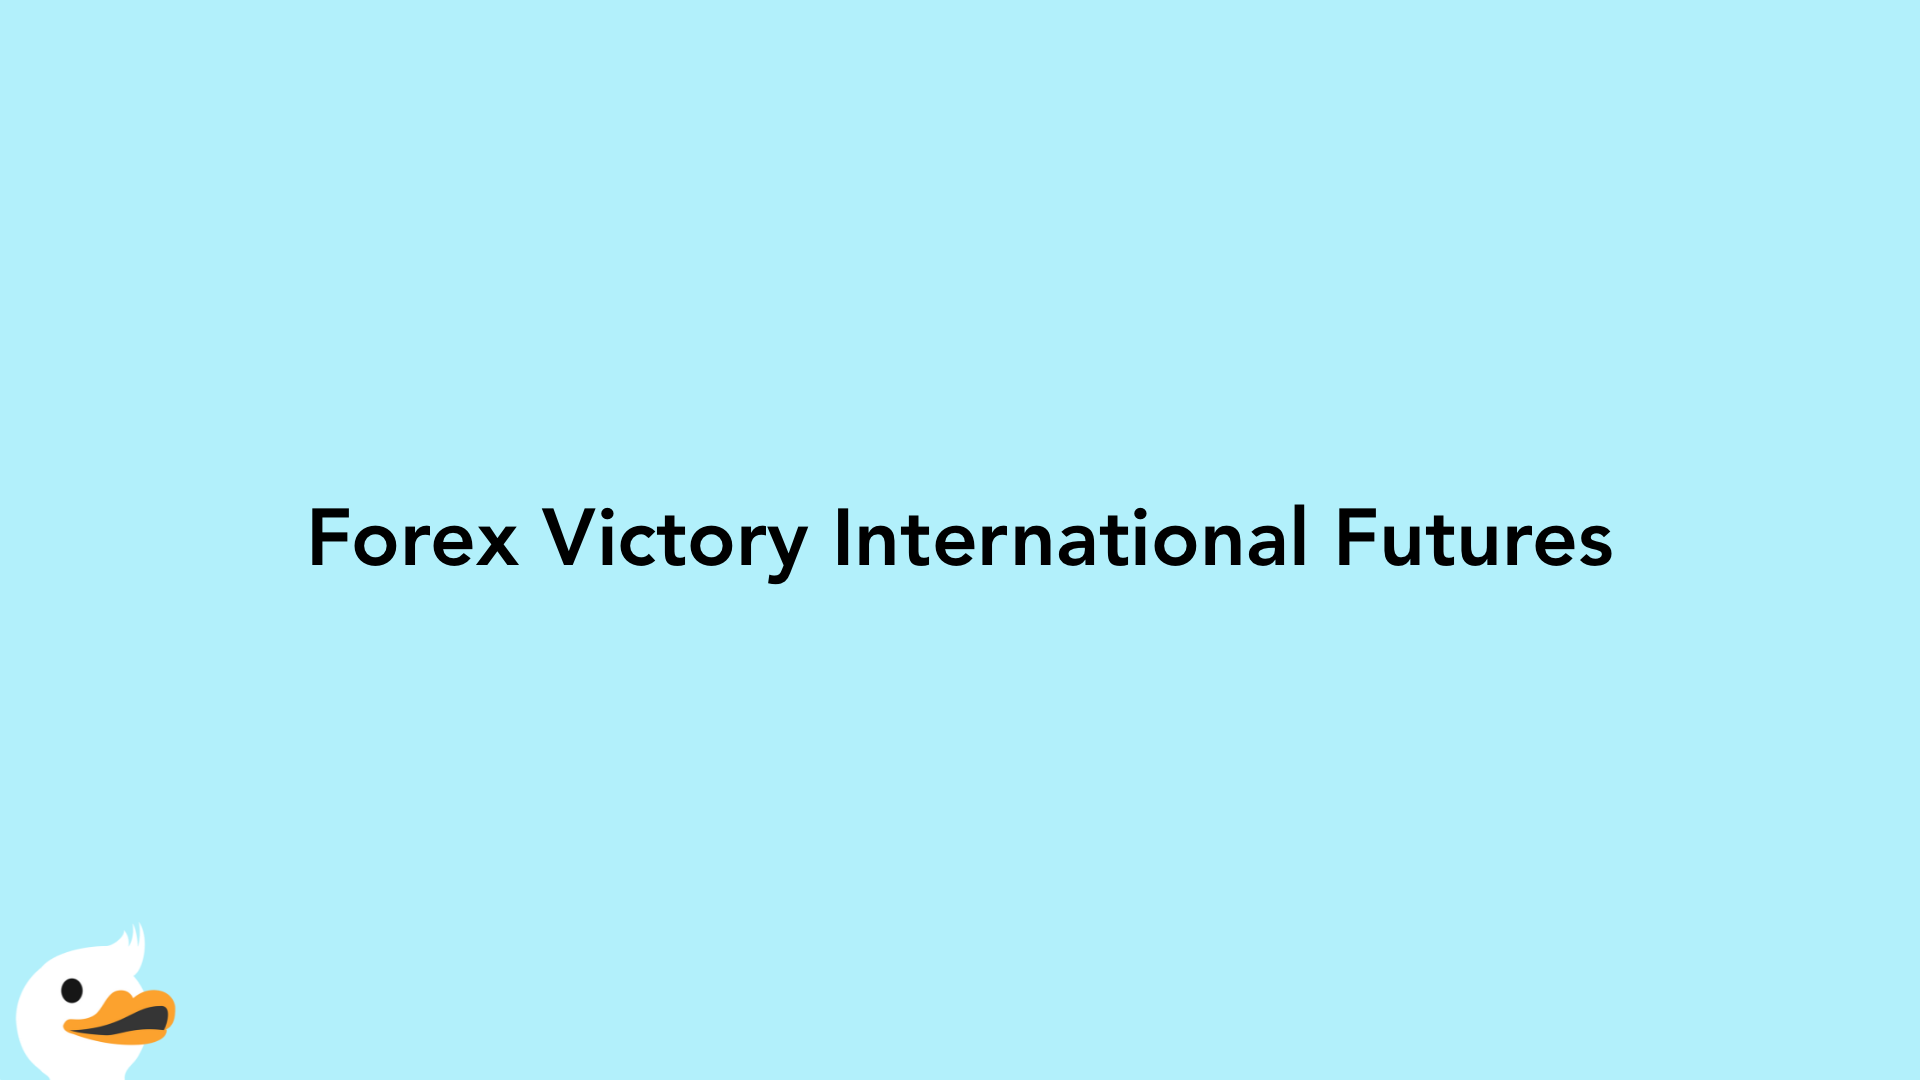 Forex Victory International Futures